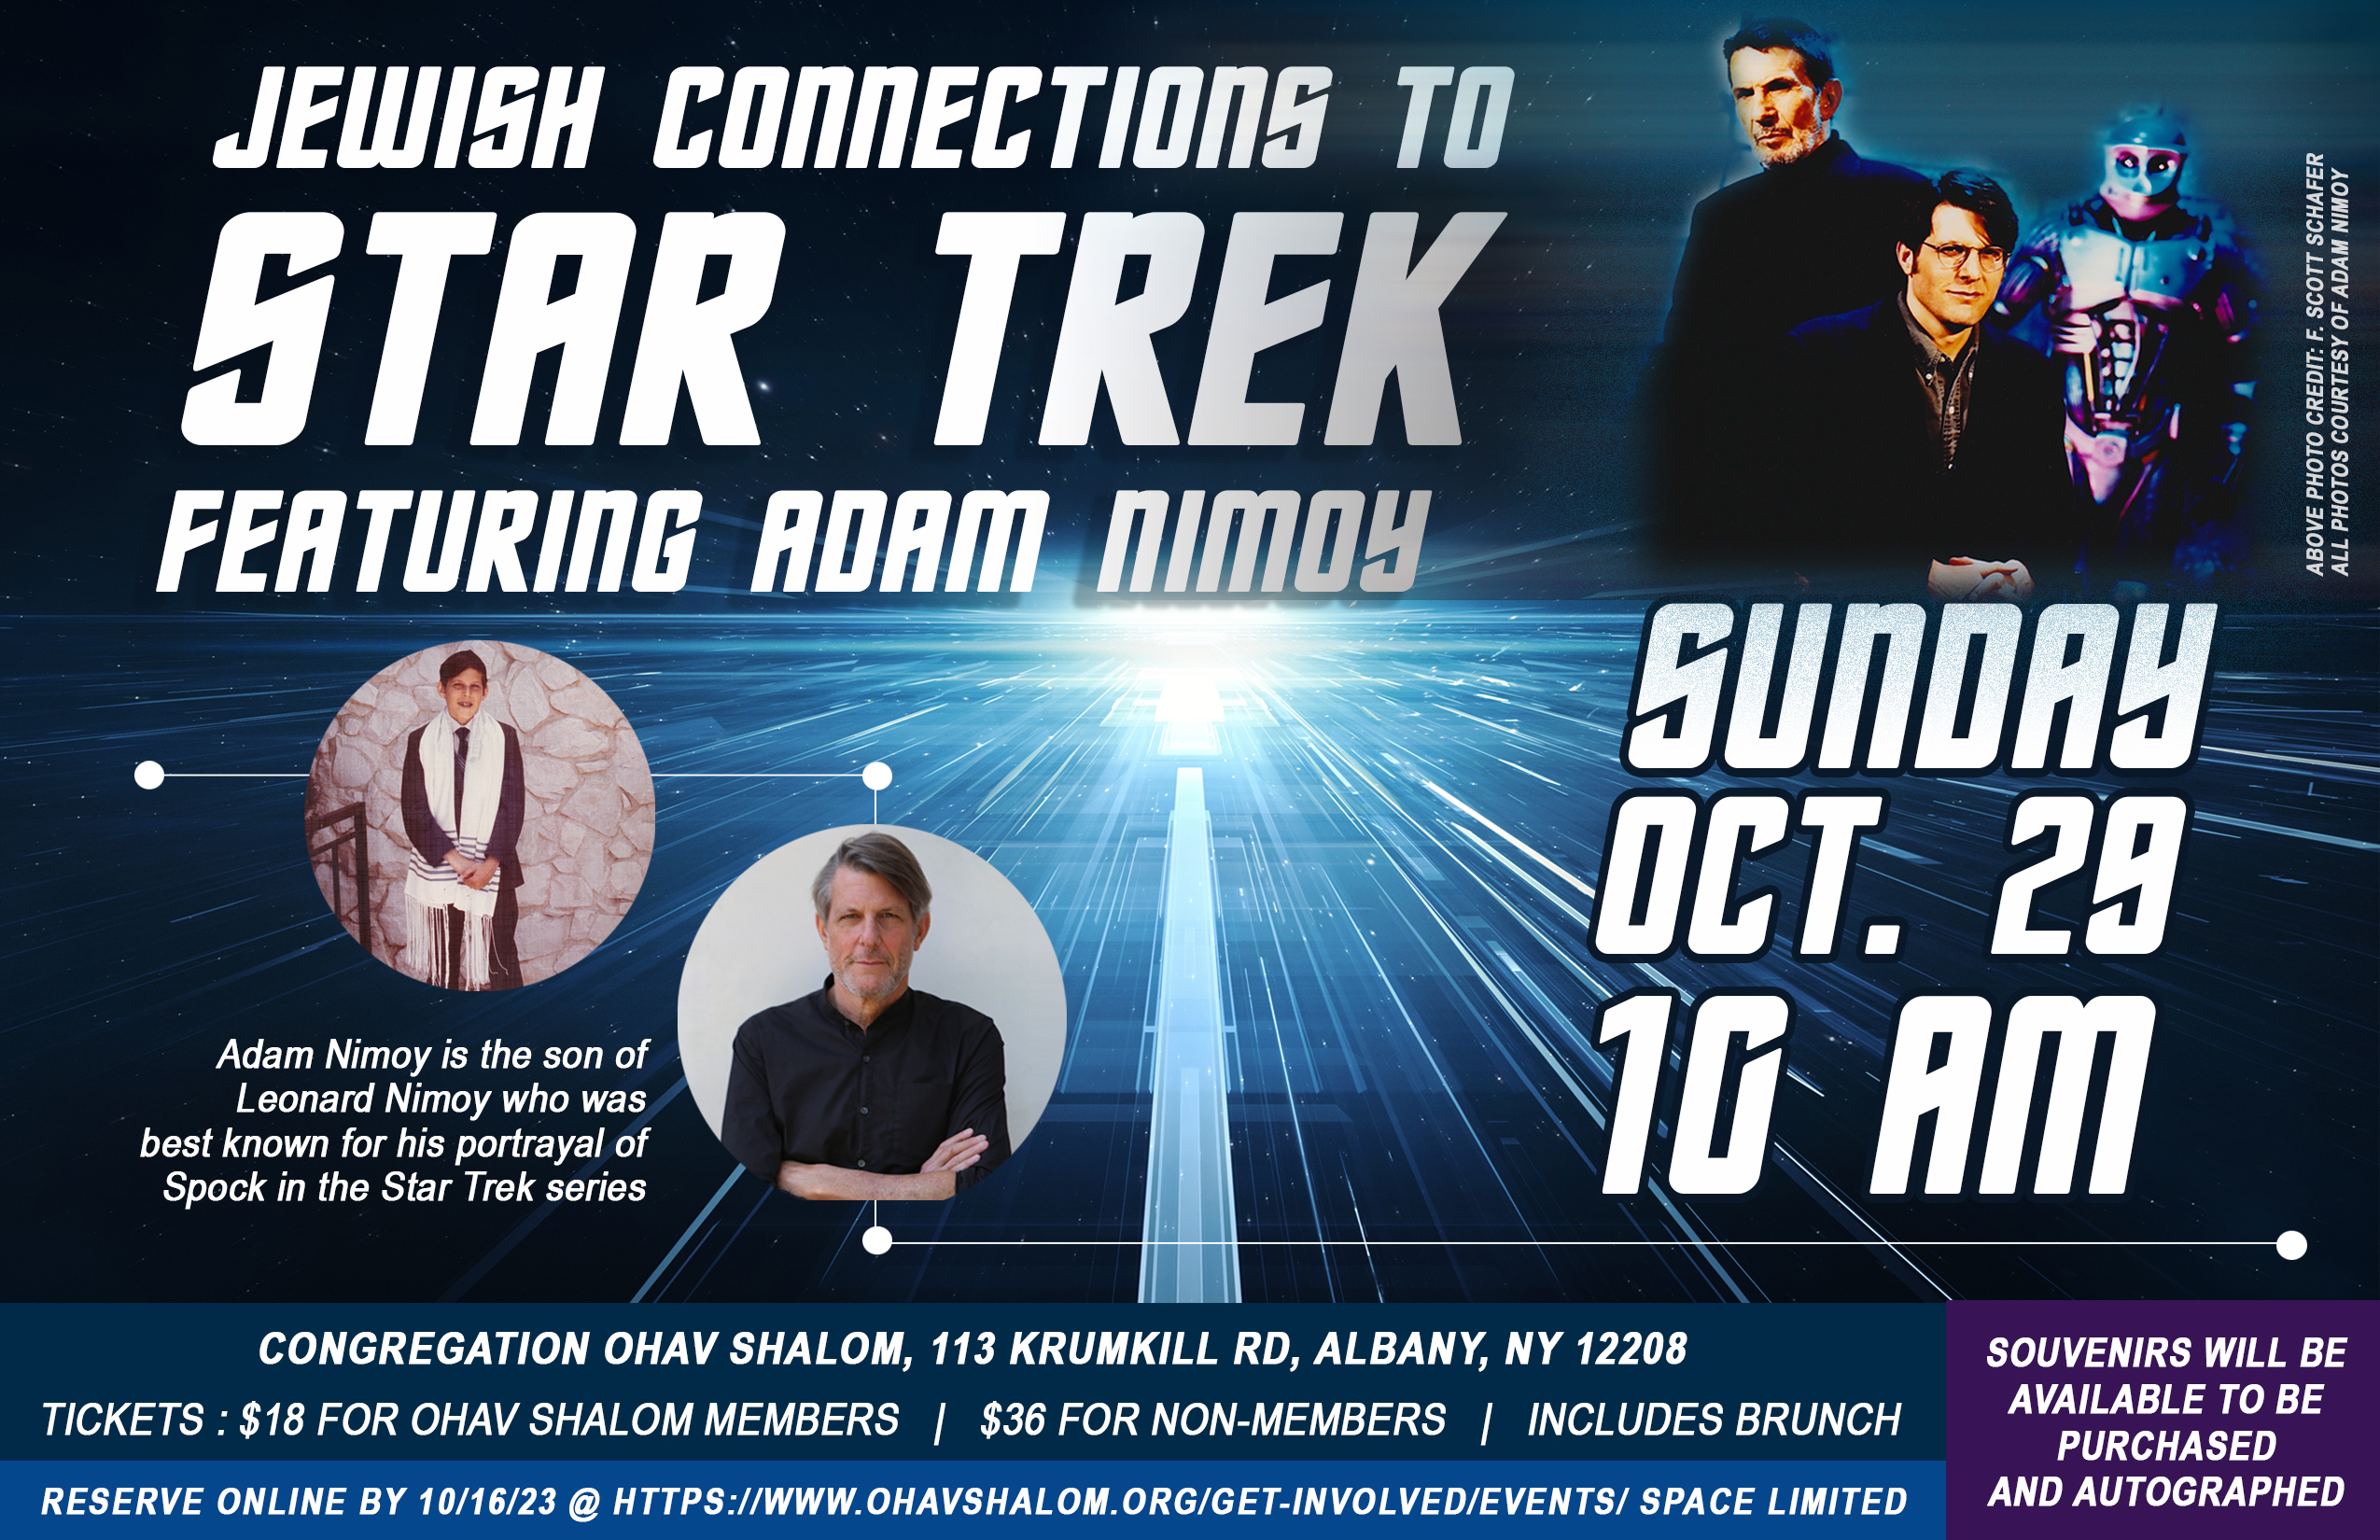 Jewish Connections to Star Trek featuring Adam Nimoy REGISTRATION CLOSED